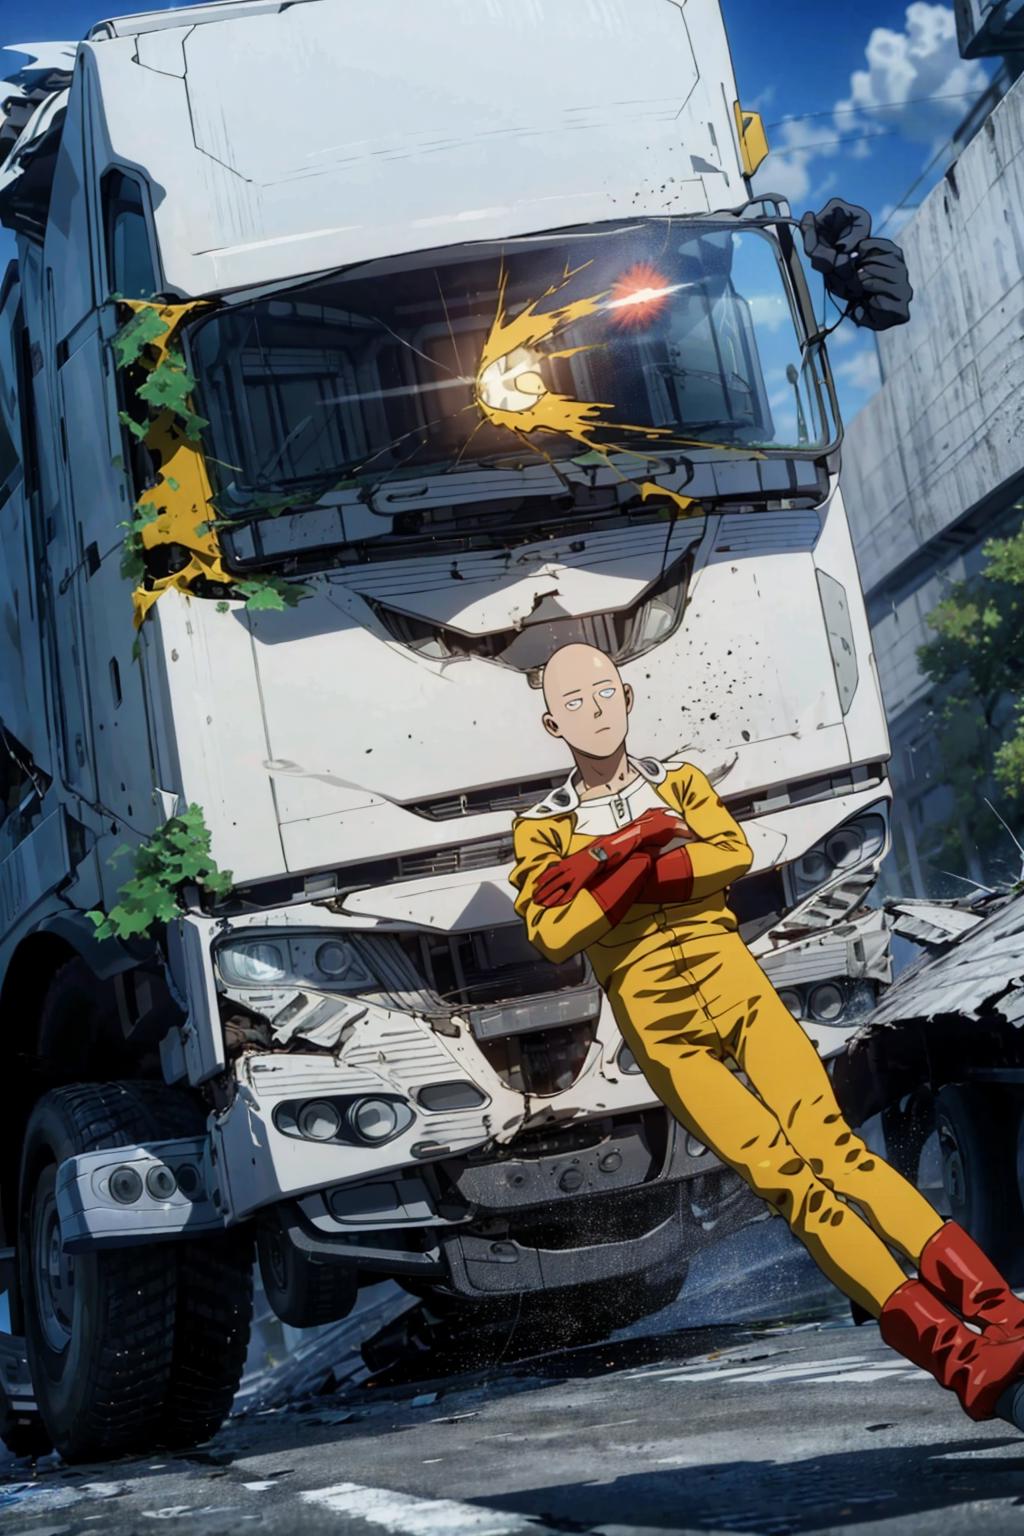 A cartoon image of a bald man in a yellow jumpsuit sitting on a destroyed truck.